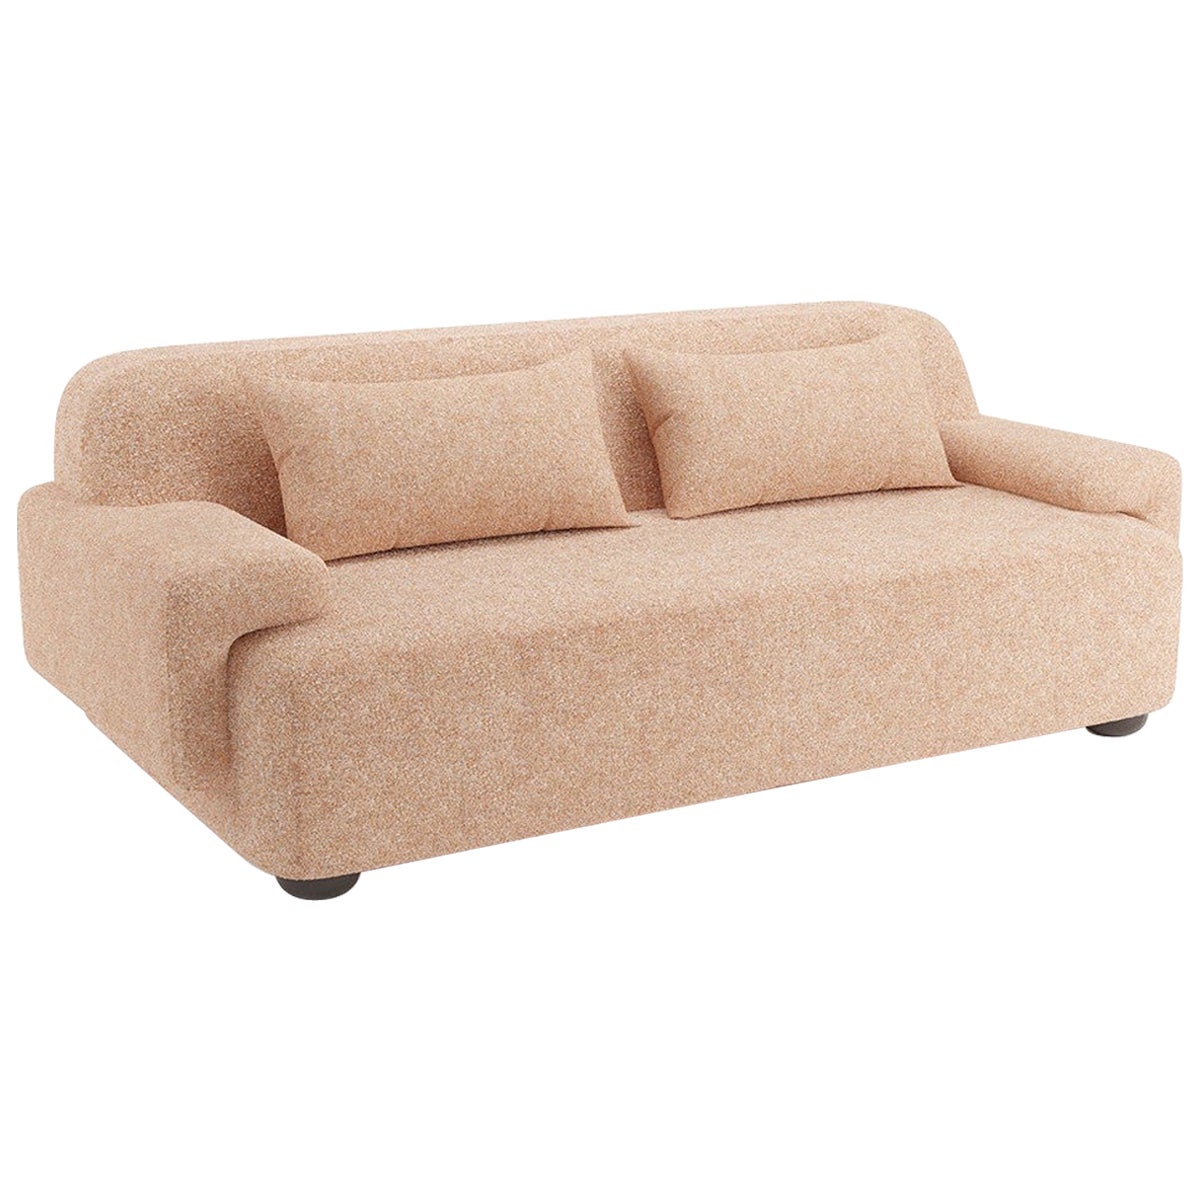 Popus Editions Lena 4 Seater Sofa in Nude Antwerp Linen Upholstery For Sale